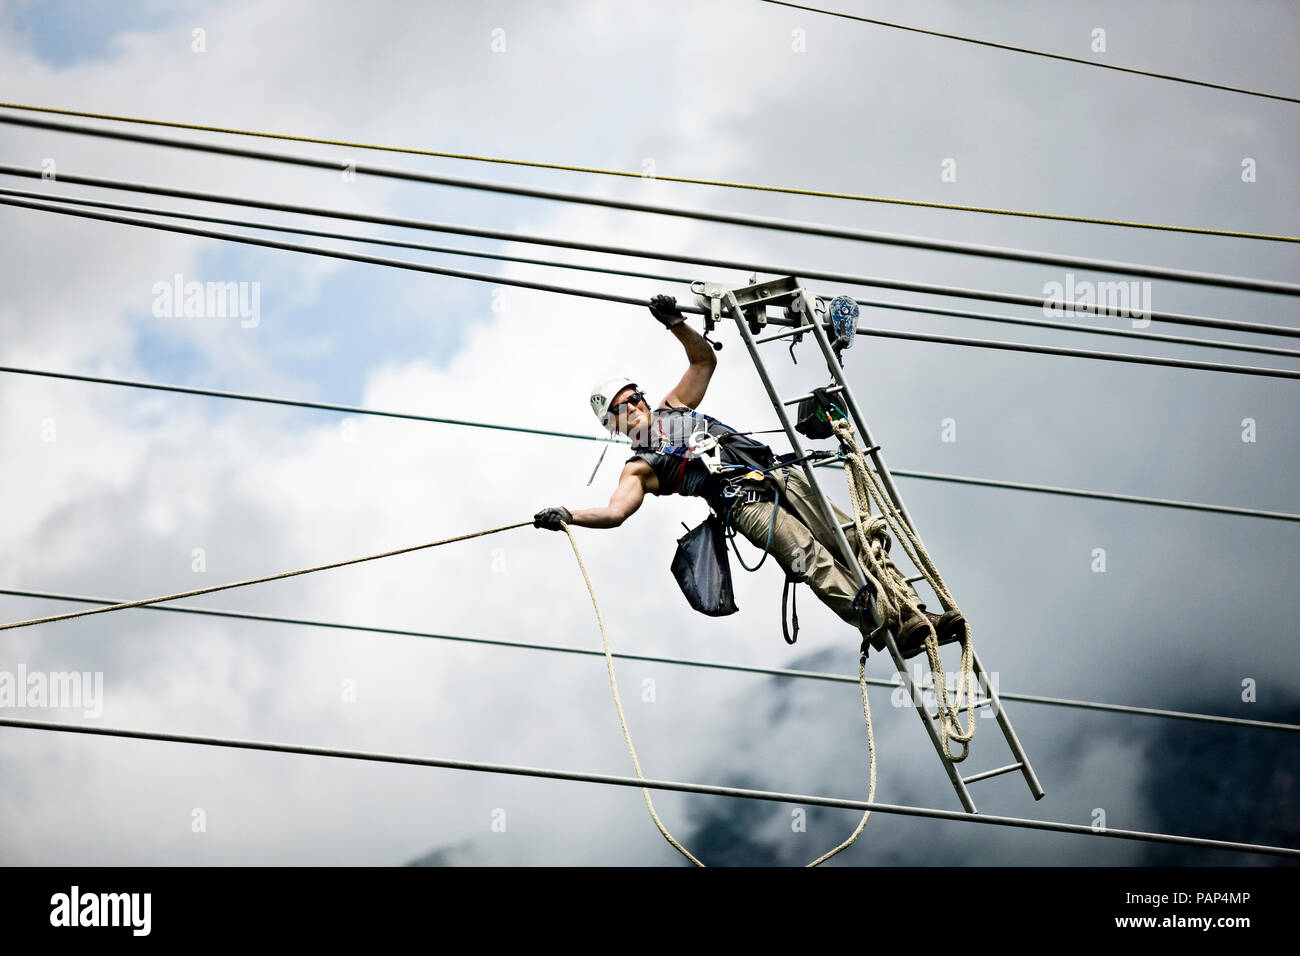 Fitter with ladder, pulling along high-voltage power line Stock Photo